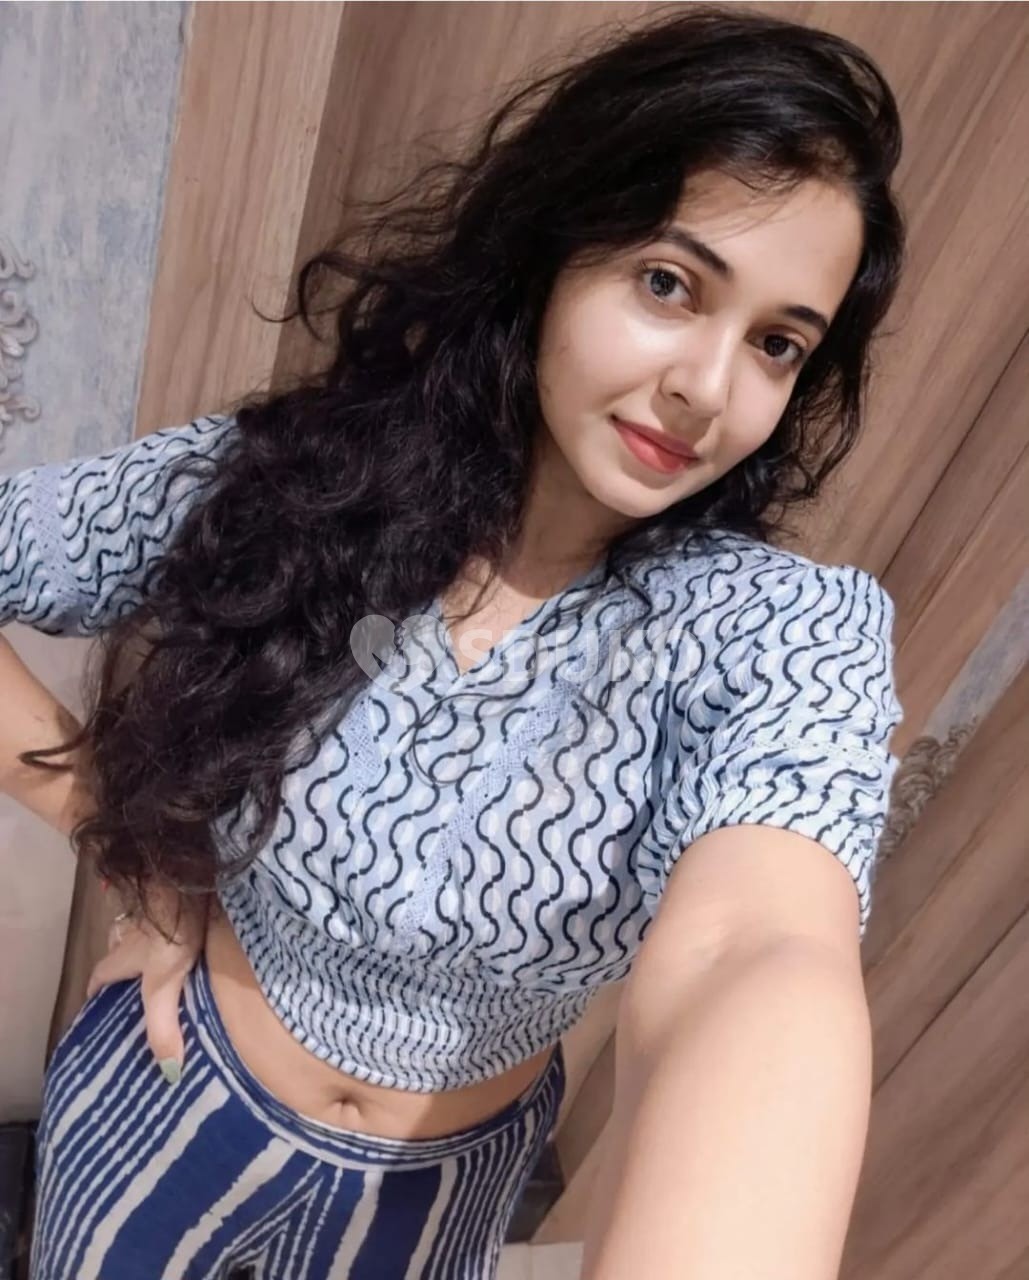 Call girl in Chennai self safe and secure high profile girl available anytime